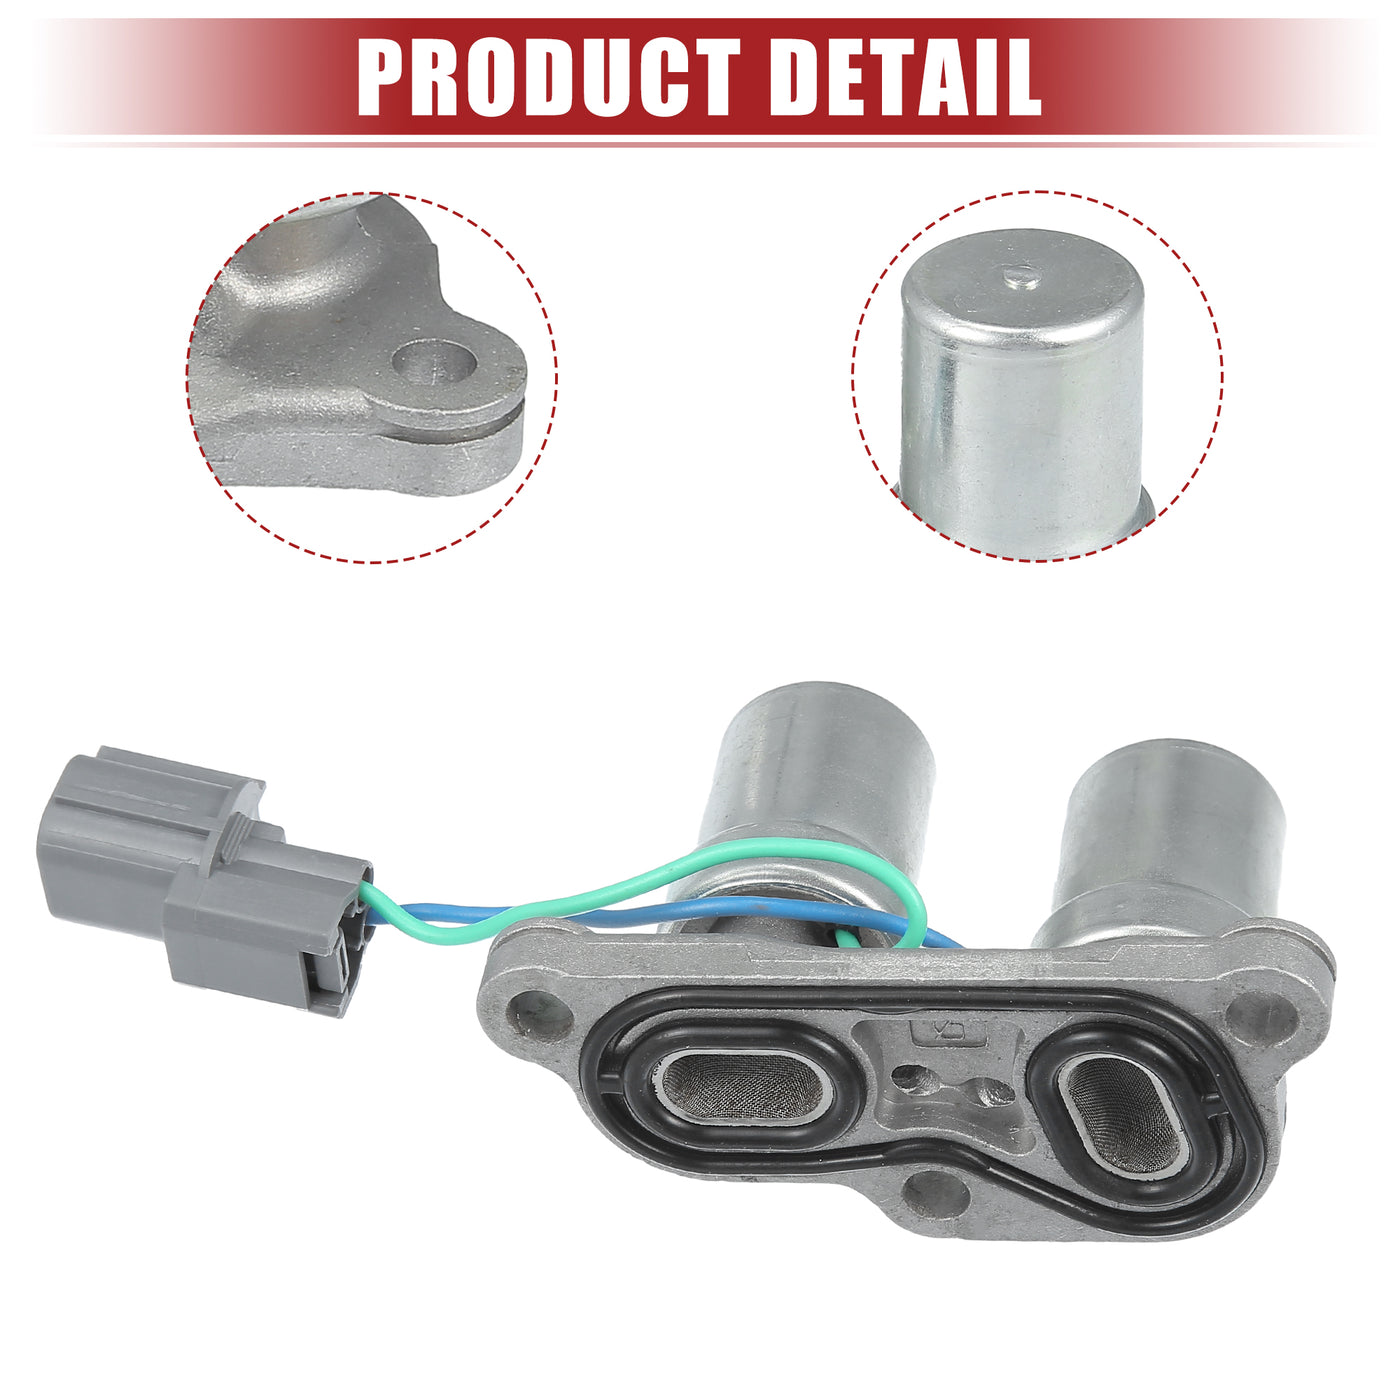 ACROPIX Transmission Shift Solenoid Replacement Fit for Honda CR-V - Pack of 1 Silver Tone Gray